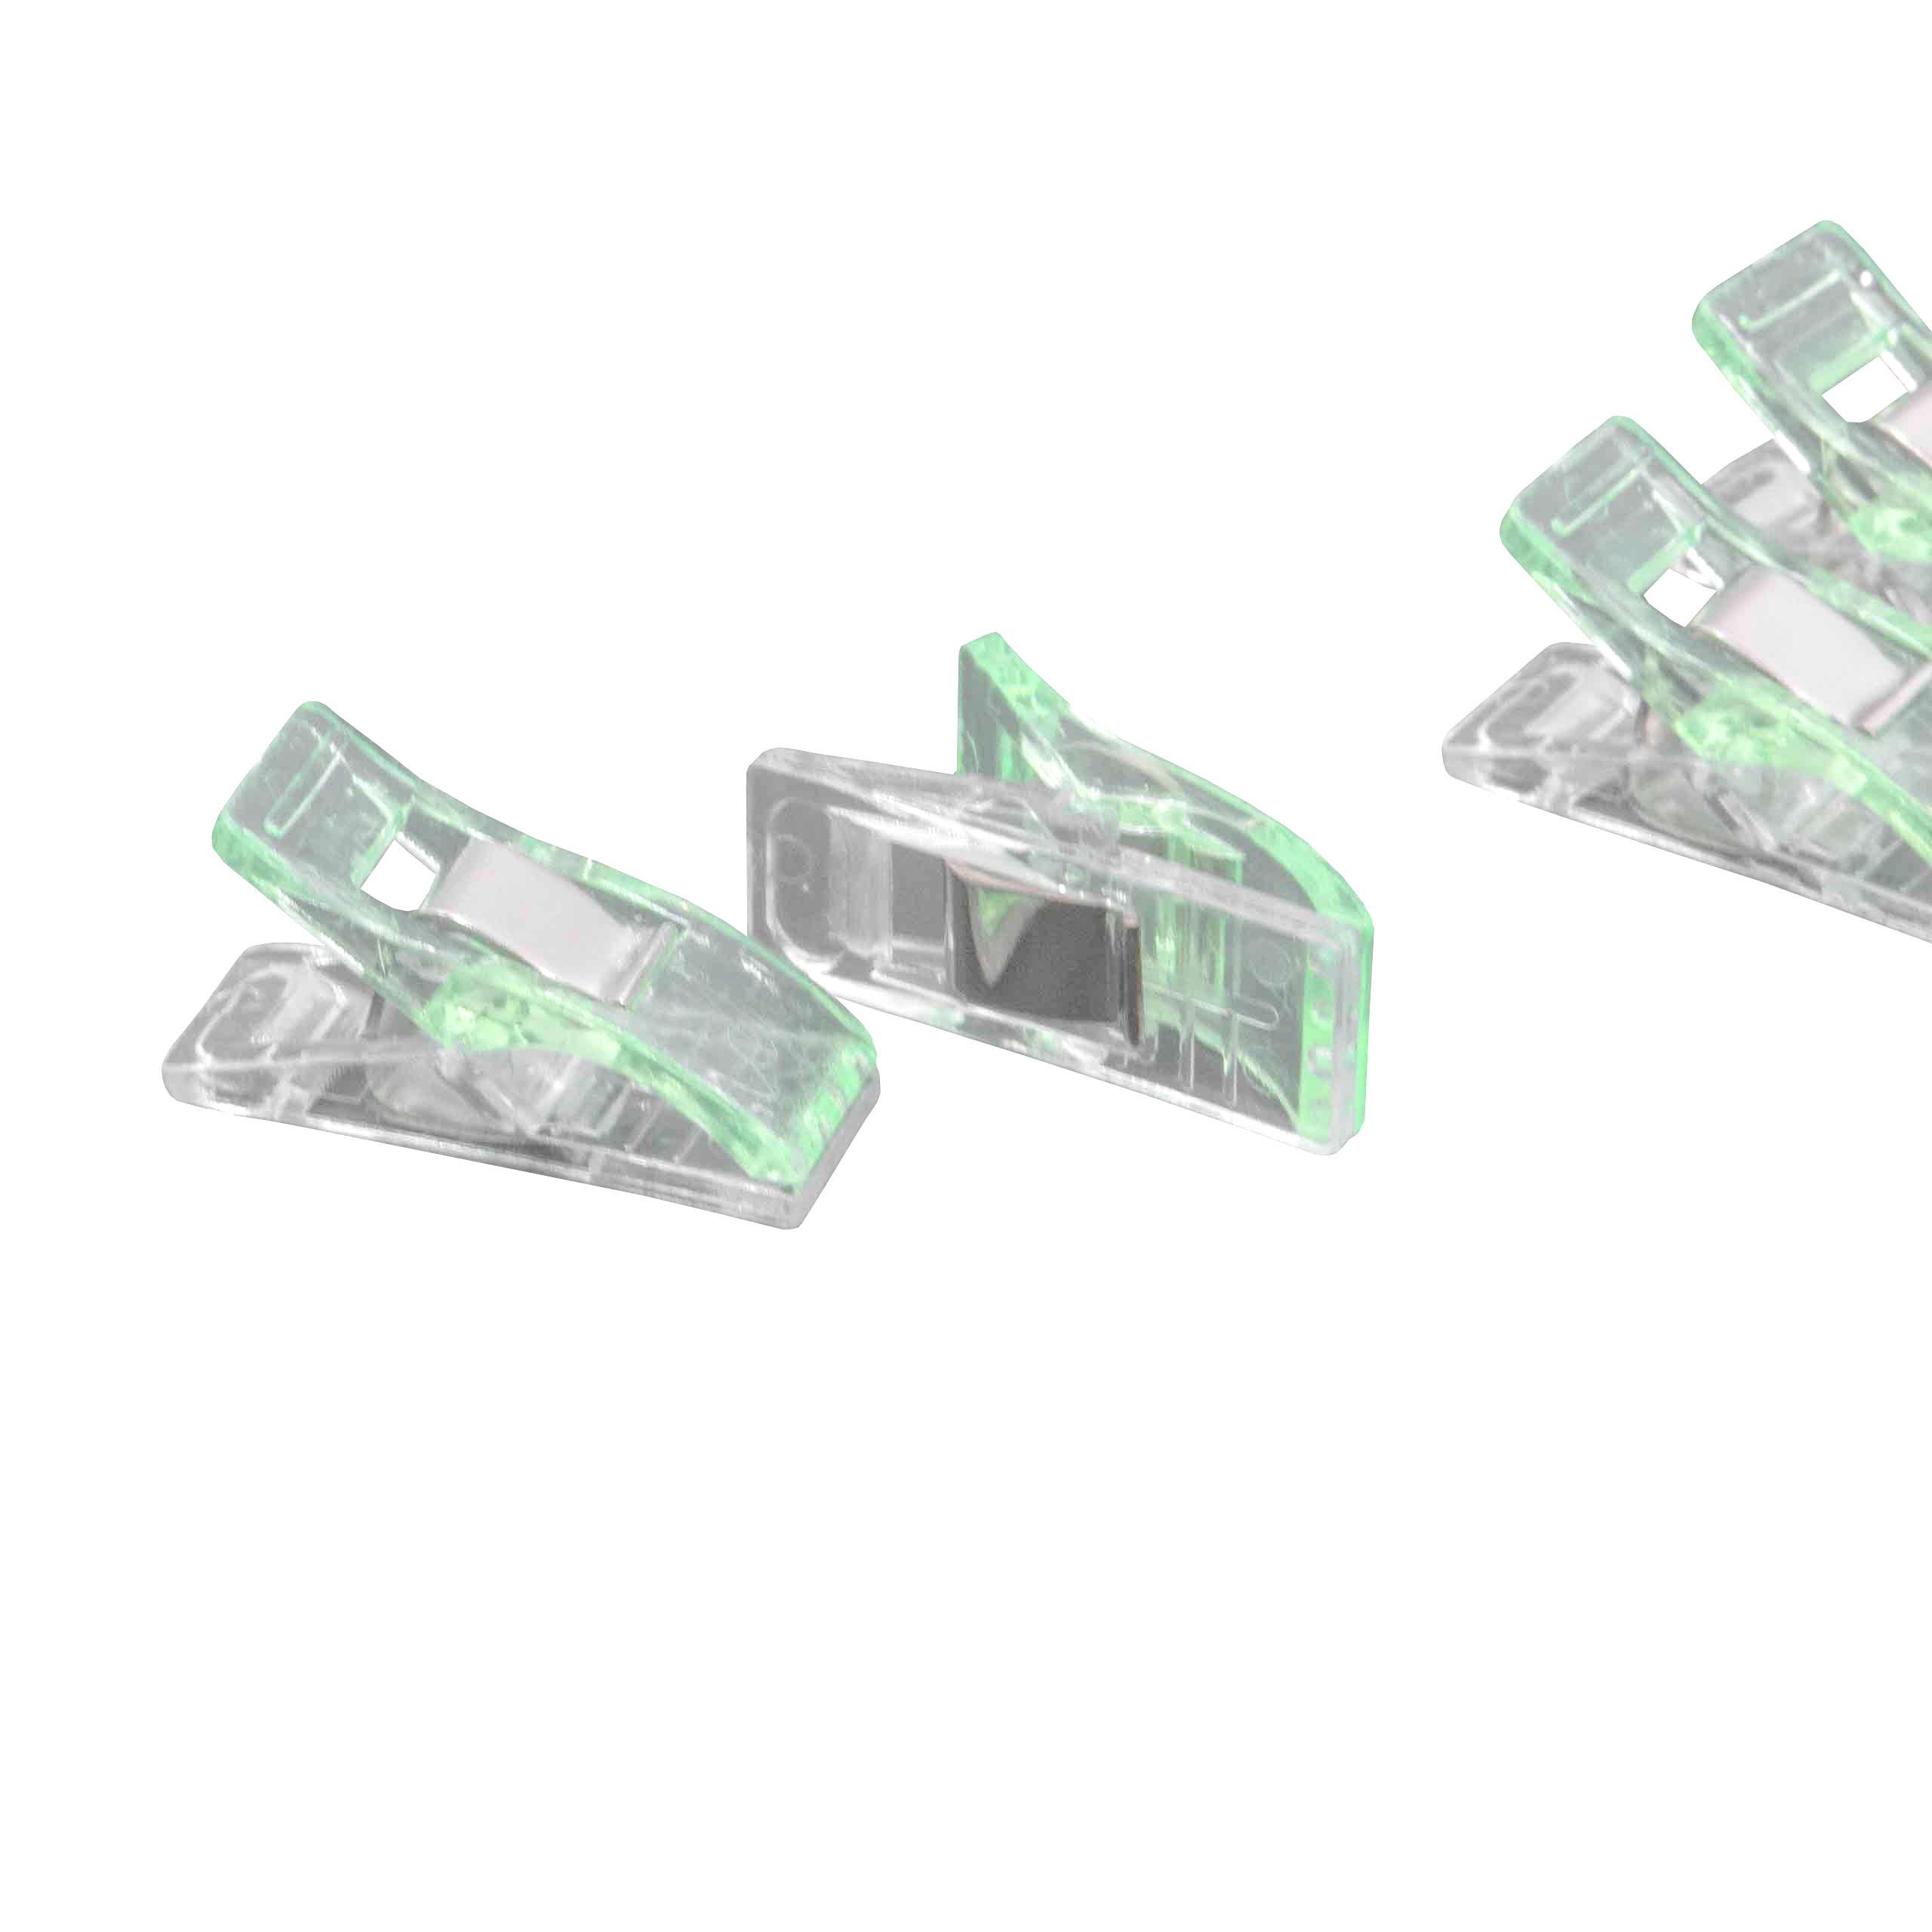 10x Wonder Clips for Sewing and Crafting - With Marking Lines, Green